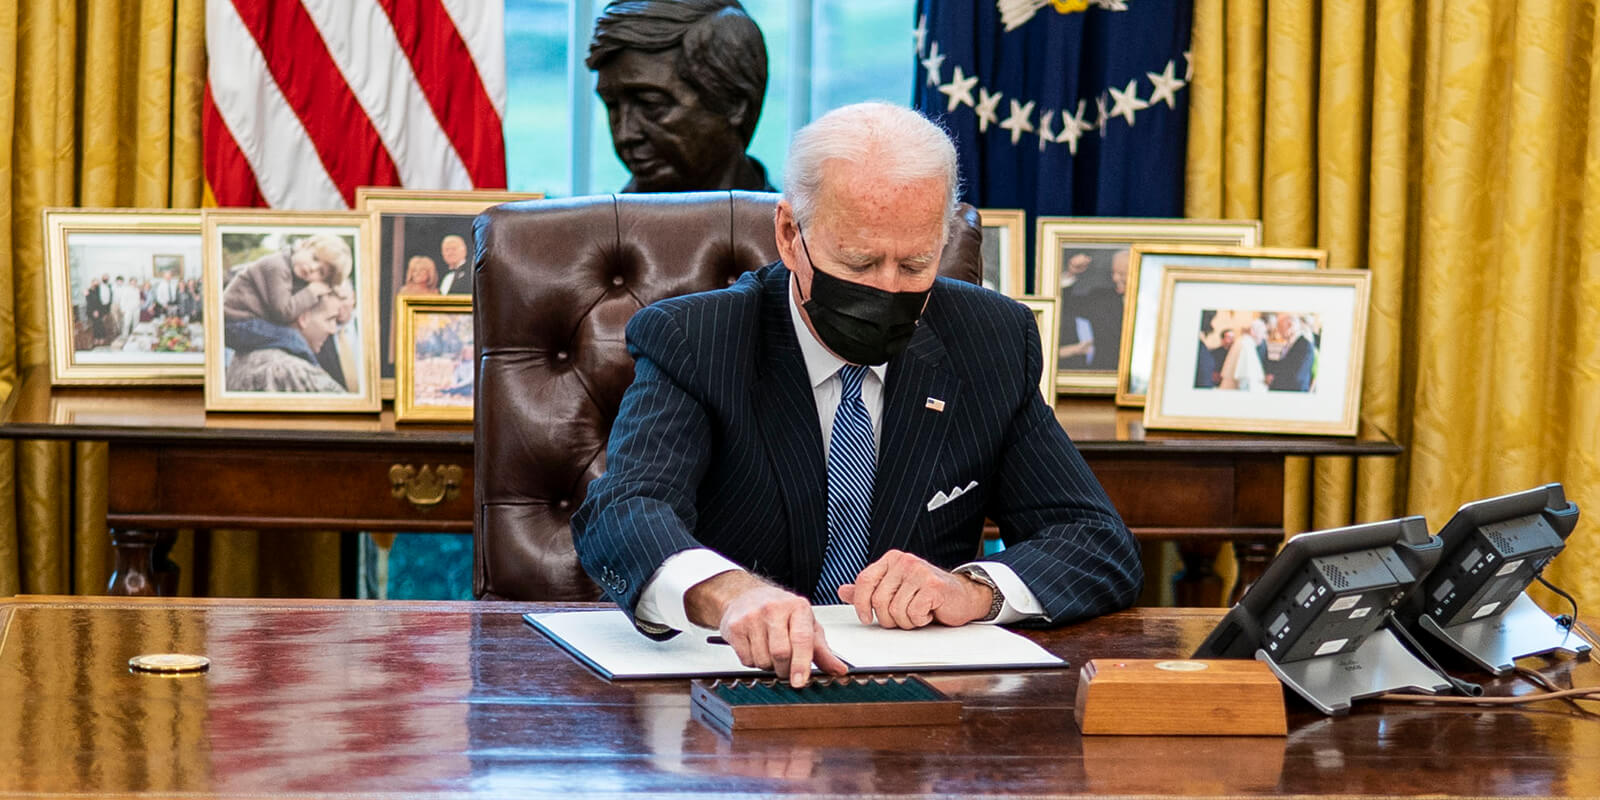 In first days as president, Biden shows bold leadership